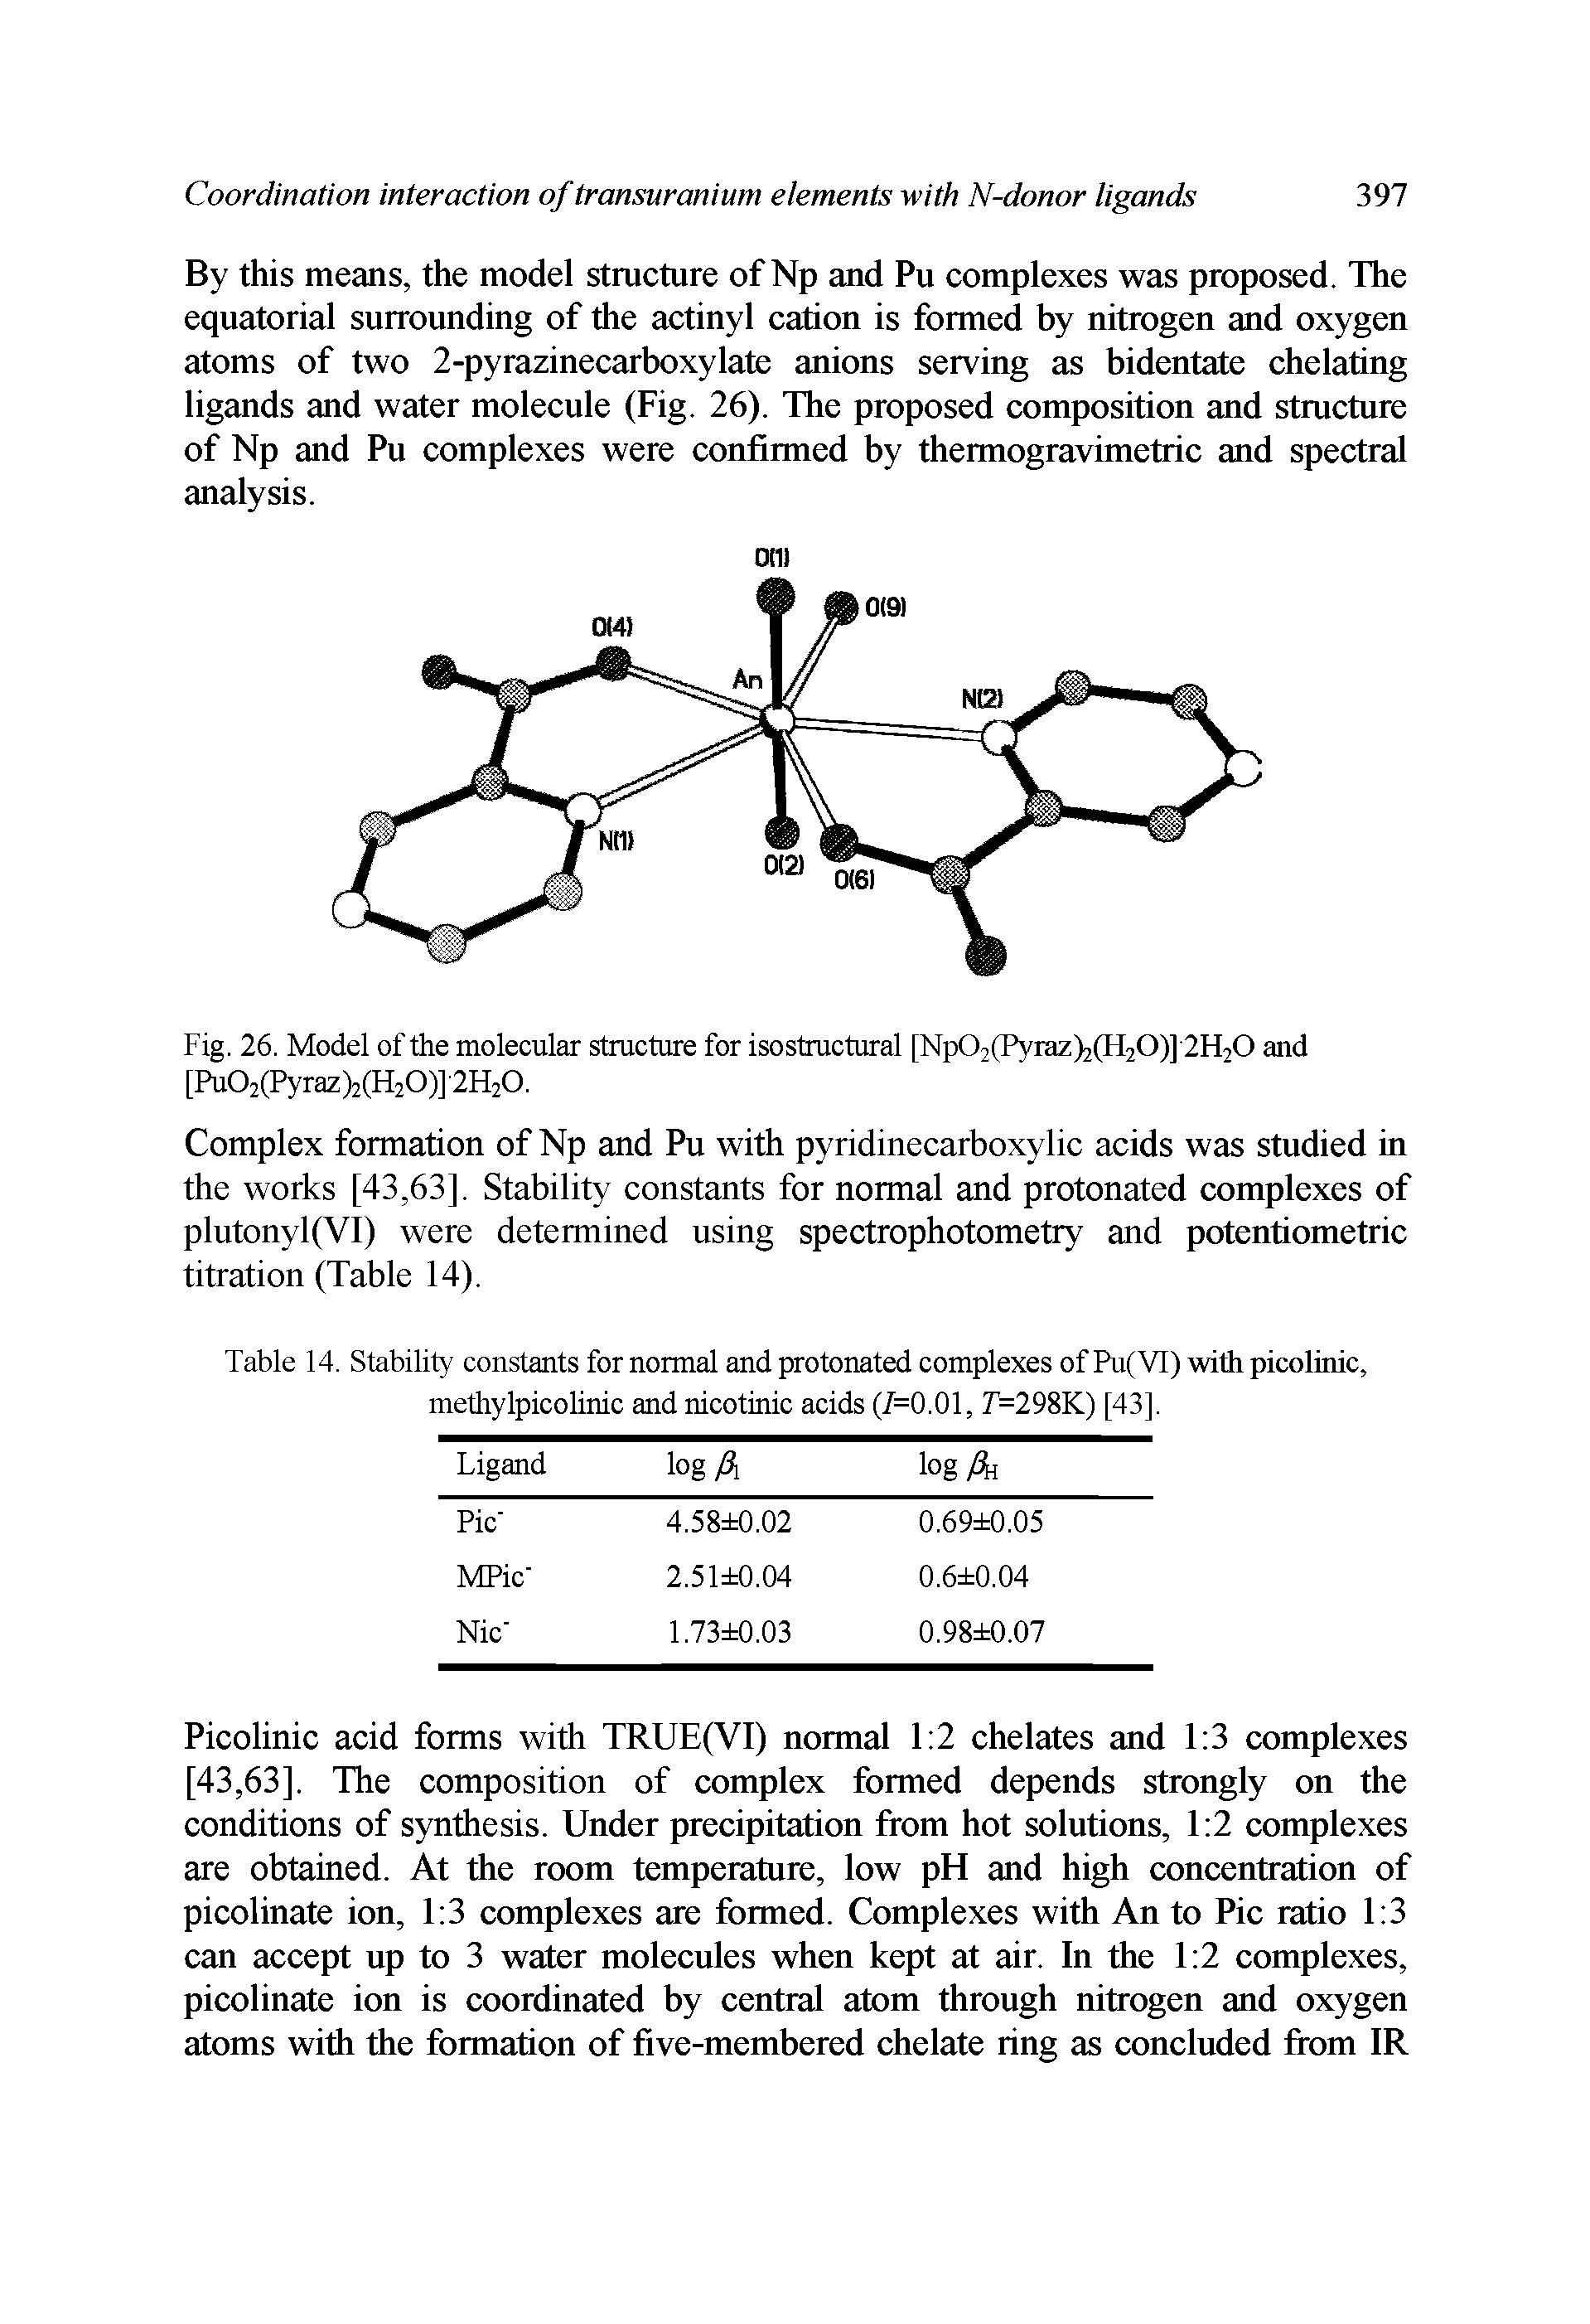 Table 14. Stability constants for normal and protonated complexes of Pu(VI) with picolinic, methylpicolinic and nicotinic acids (7=0.01, r=298K) [43],...